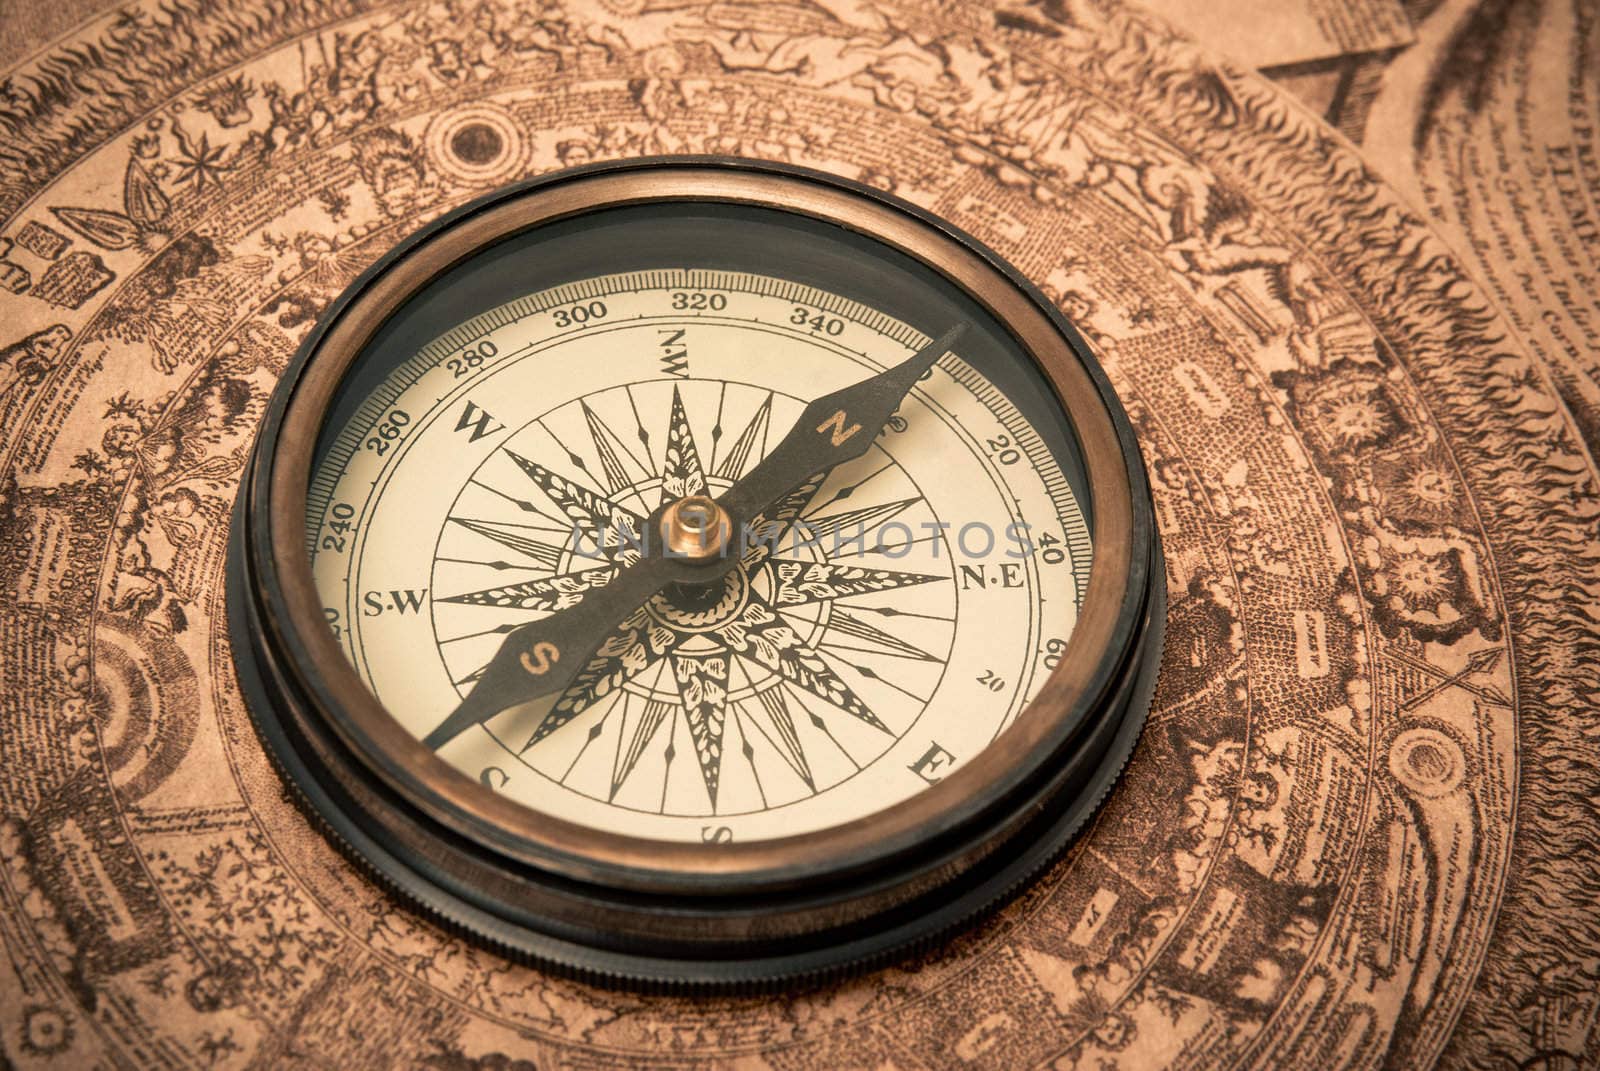 Antique Compass on Map by bloomua